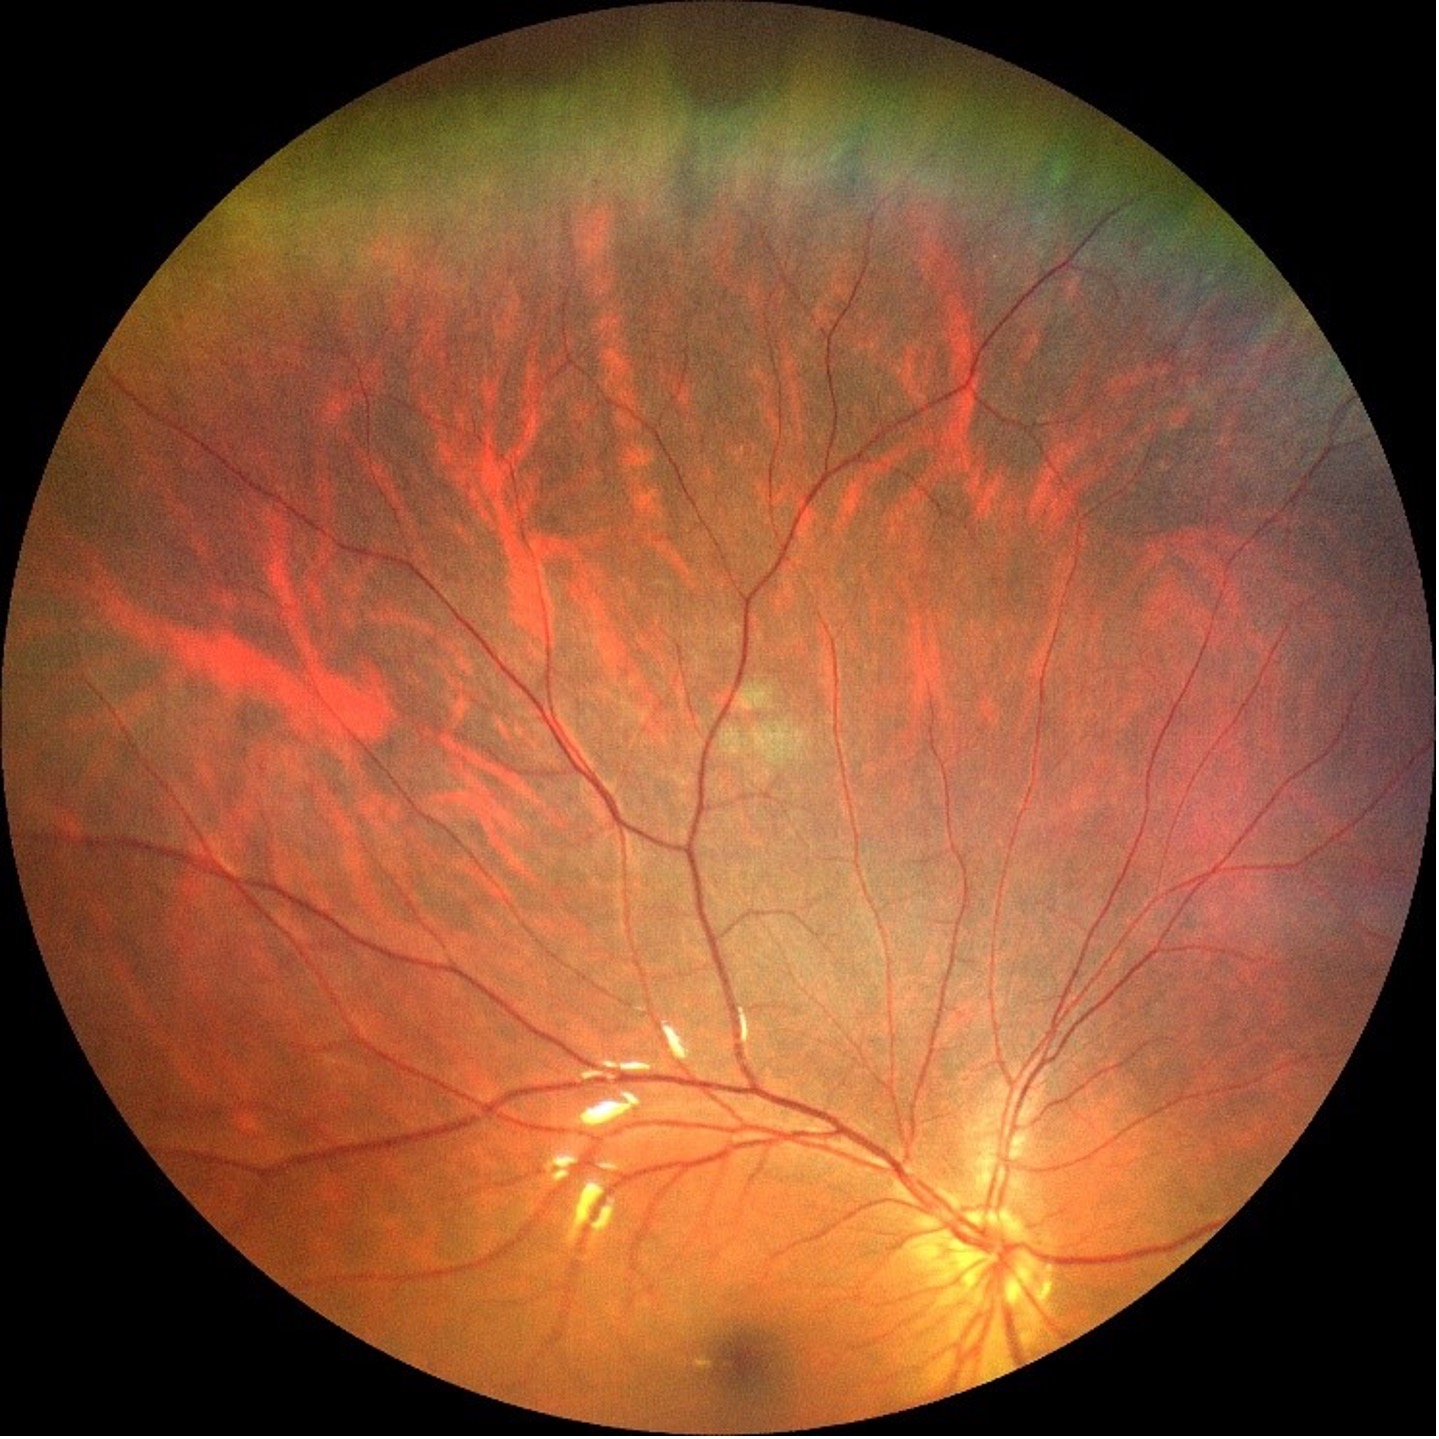 ZEISS CLARUS 500 ultra-wide field image captures peripheral retinal in a myopic eye. 